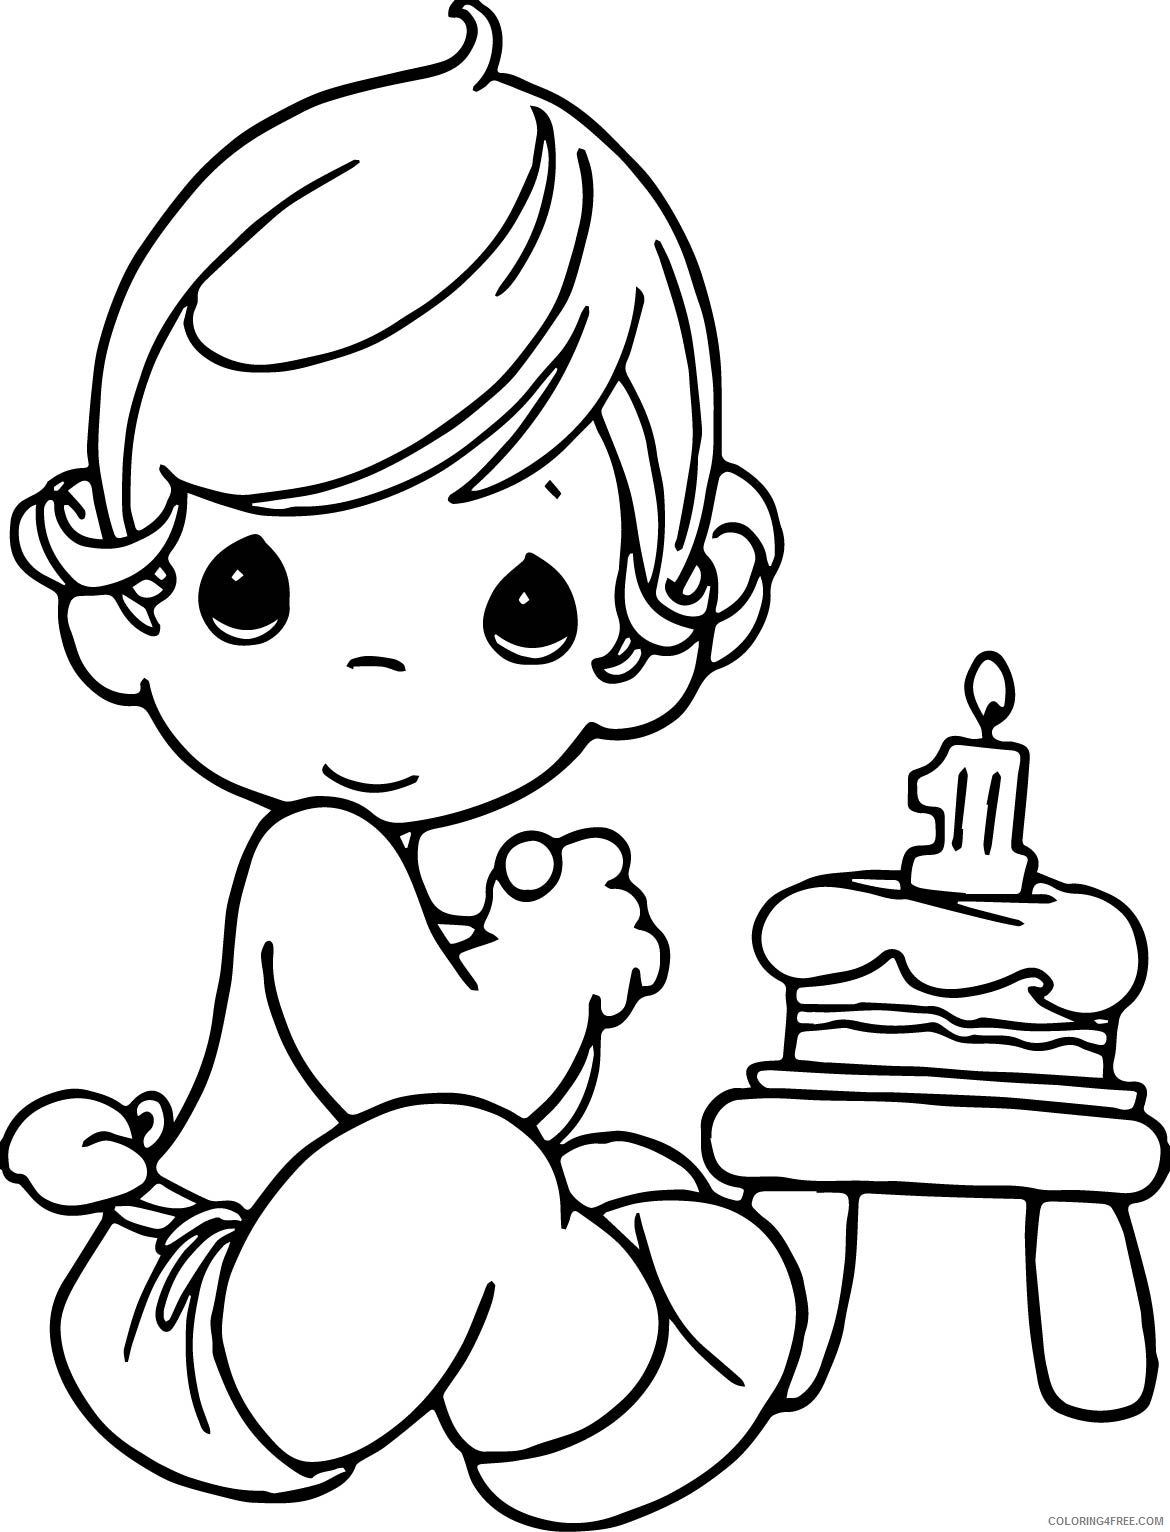 Precious Moments Coloring Pages precious moment Printable 2021 4712 Coloring4free